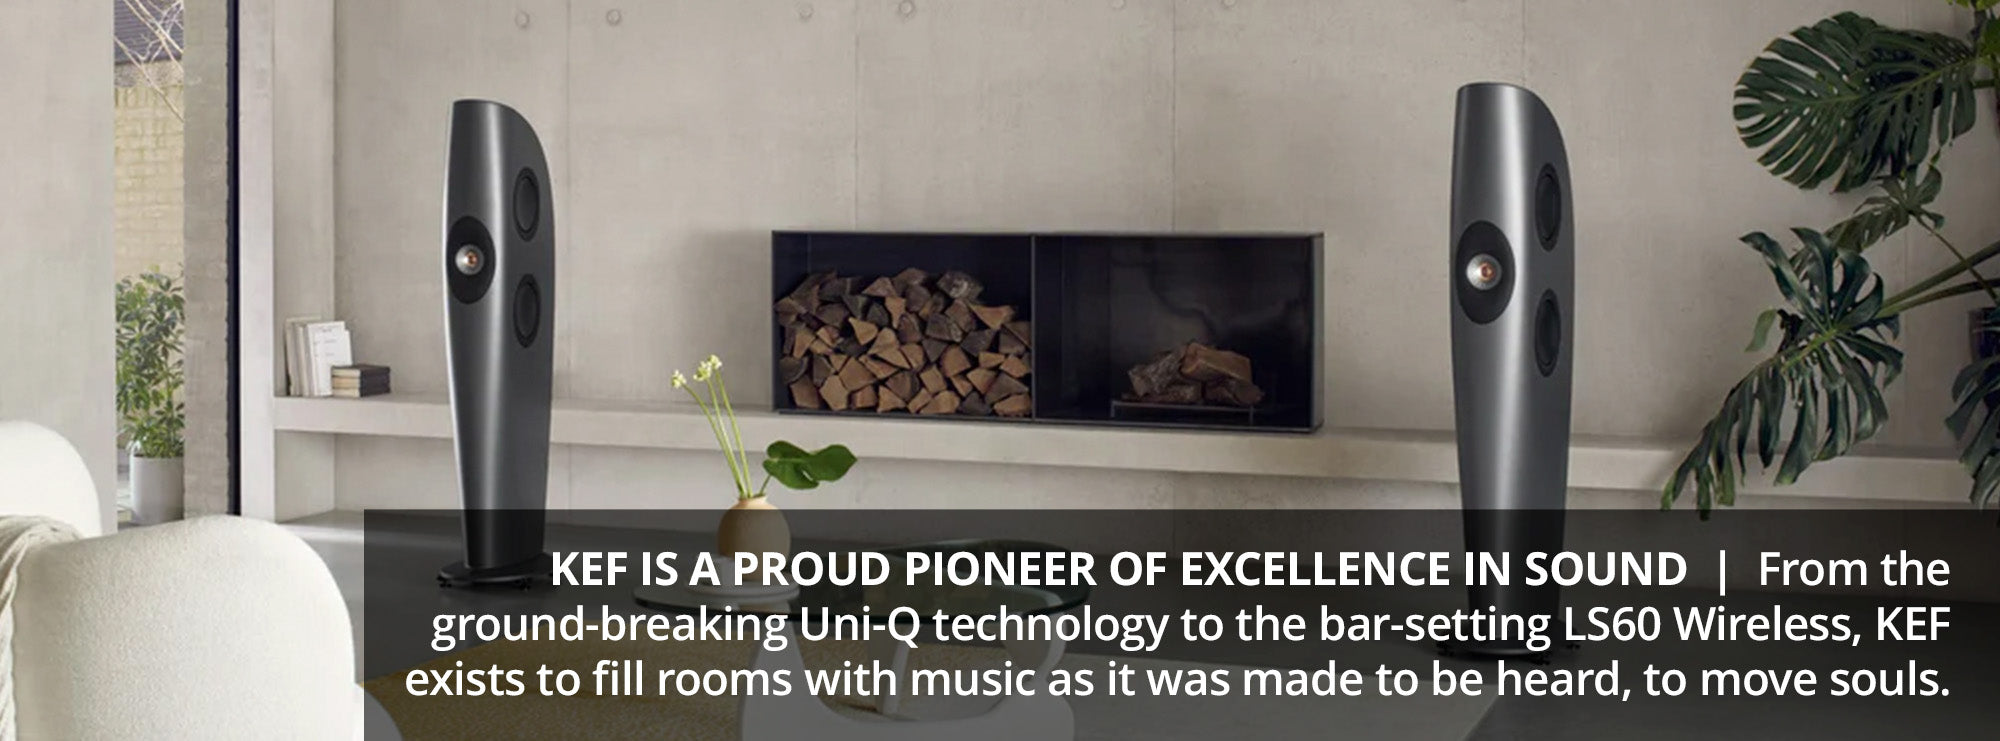 KEF is a proud pioneer of excellence in sound  From the ground-breaking Uni-Q technology to the bar-setting LS60 Wireless, KEF exists to fill rooms with music as it was made to be heard, to move souls.